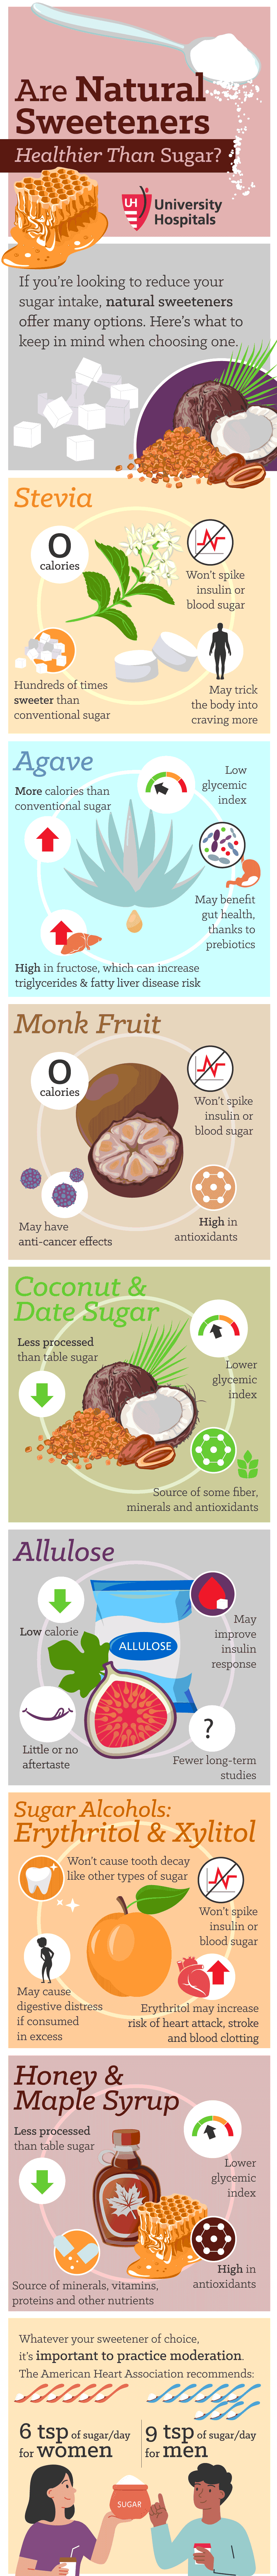 Infographic: Are Natural Sweeteners Healthier Than Sugar?